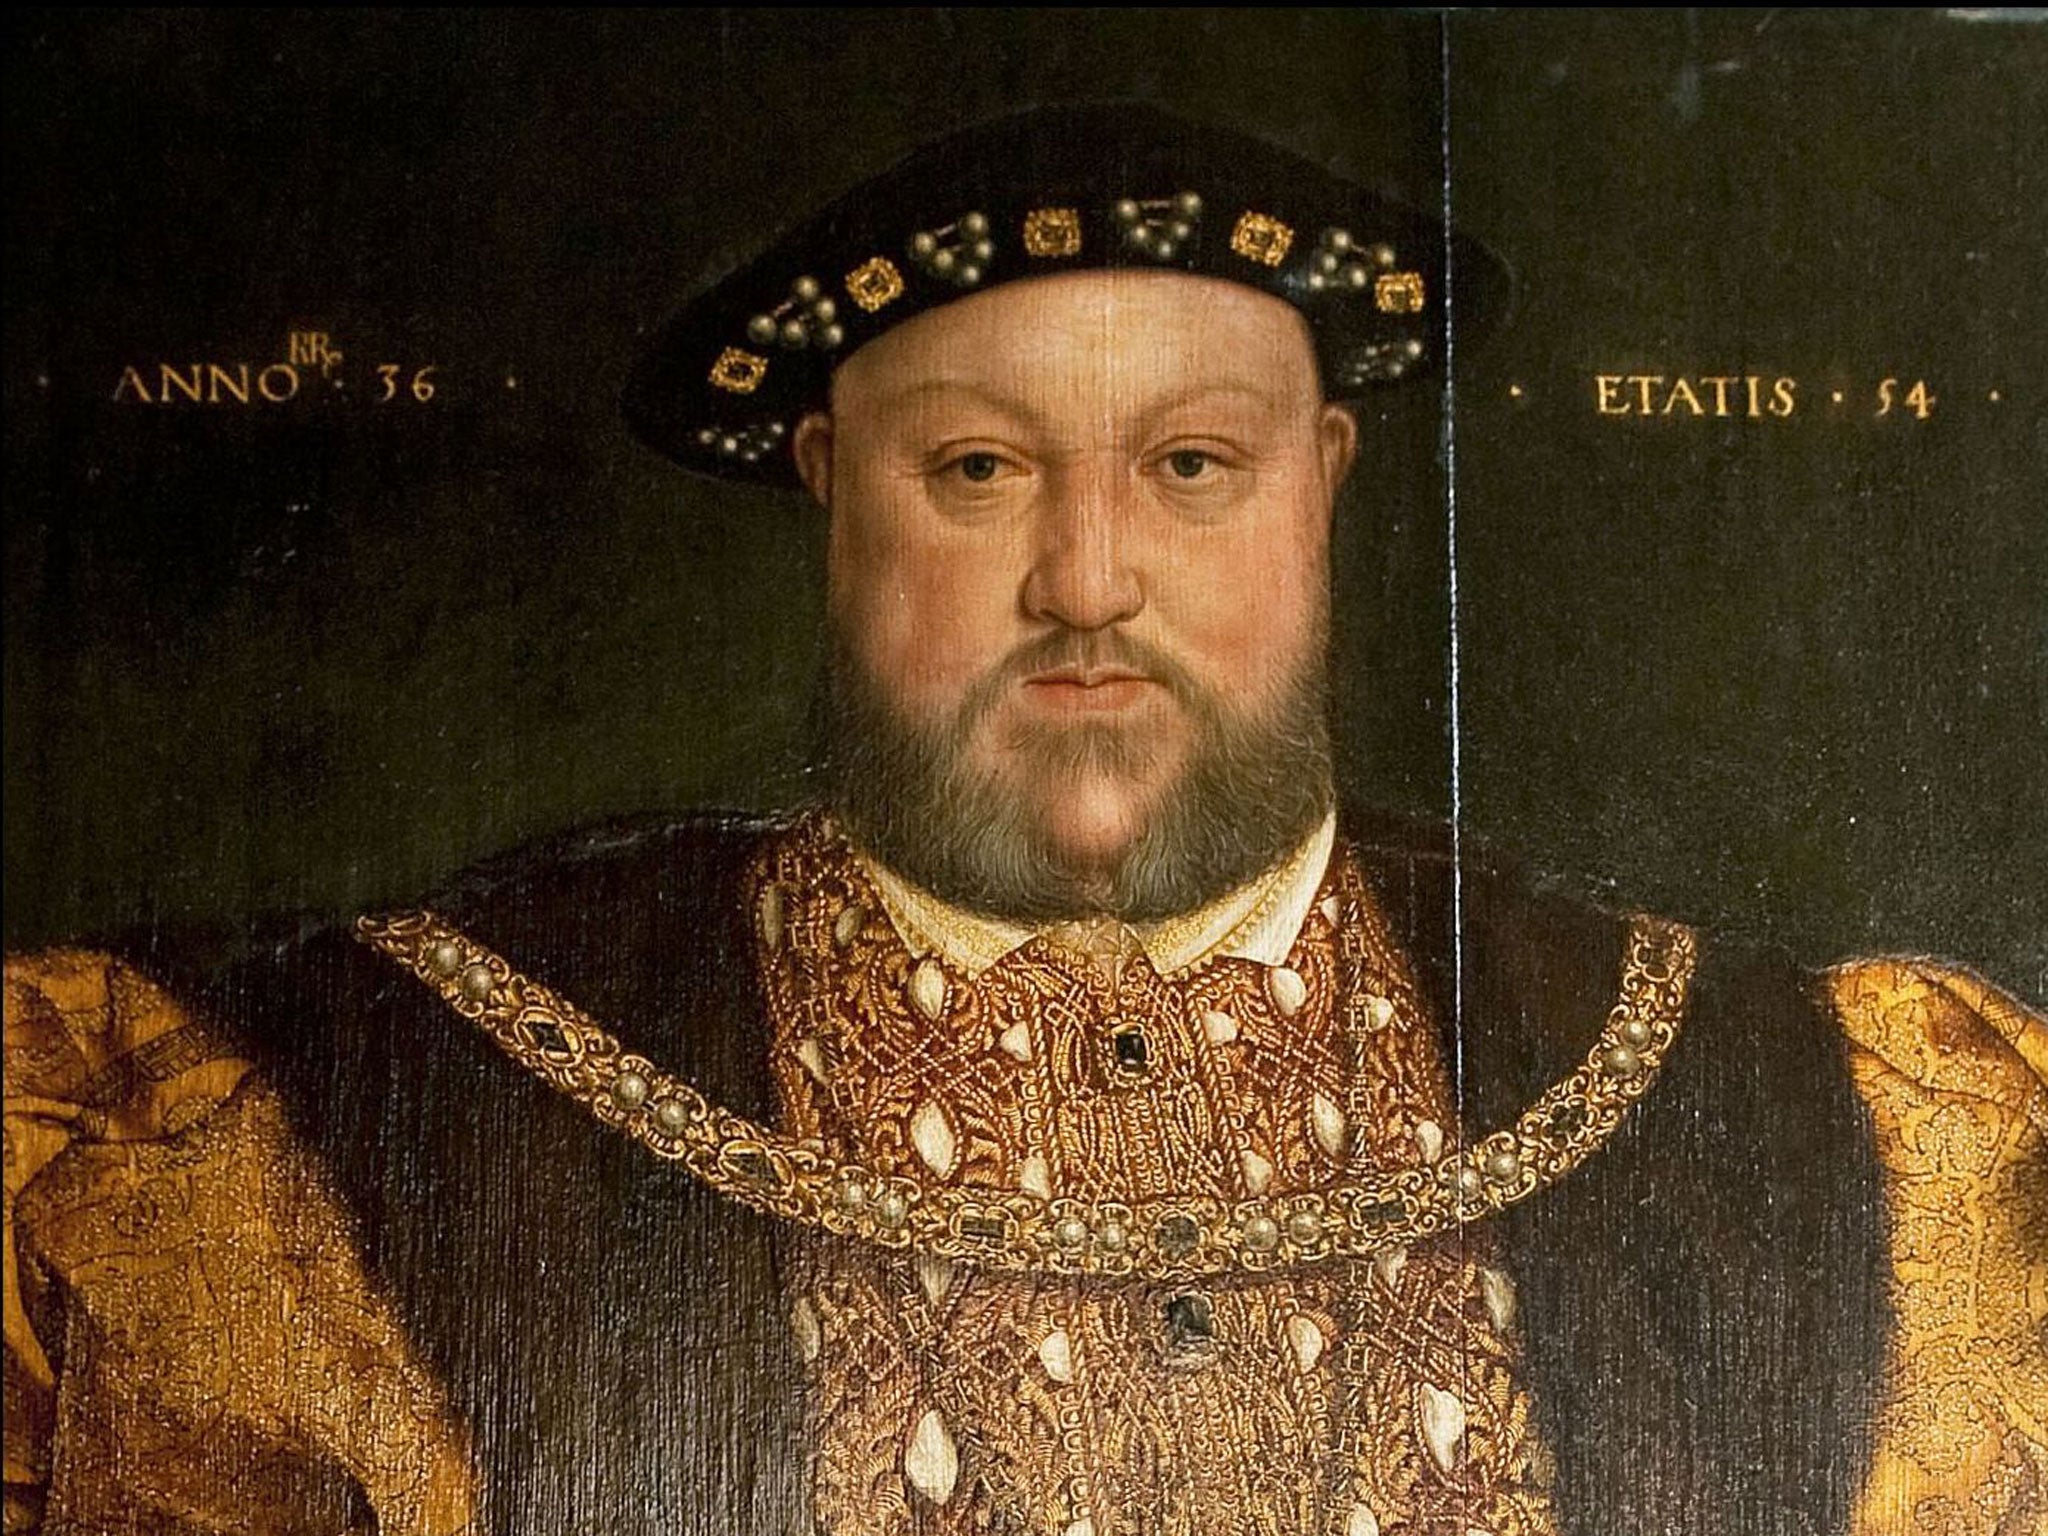 Fit for a king: were historical portraits the first selfies?